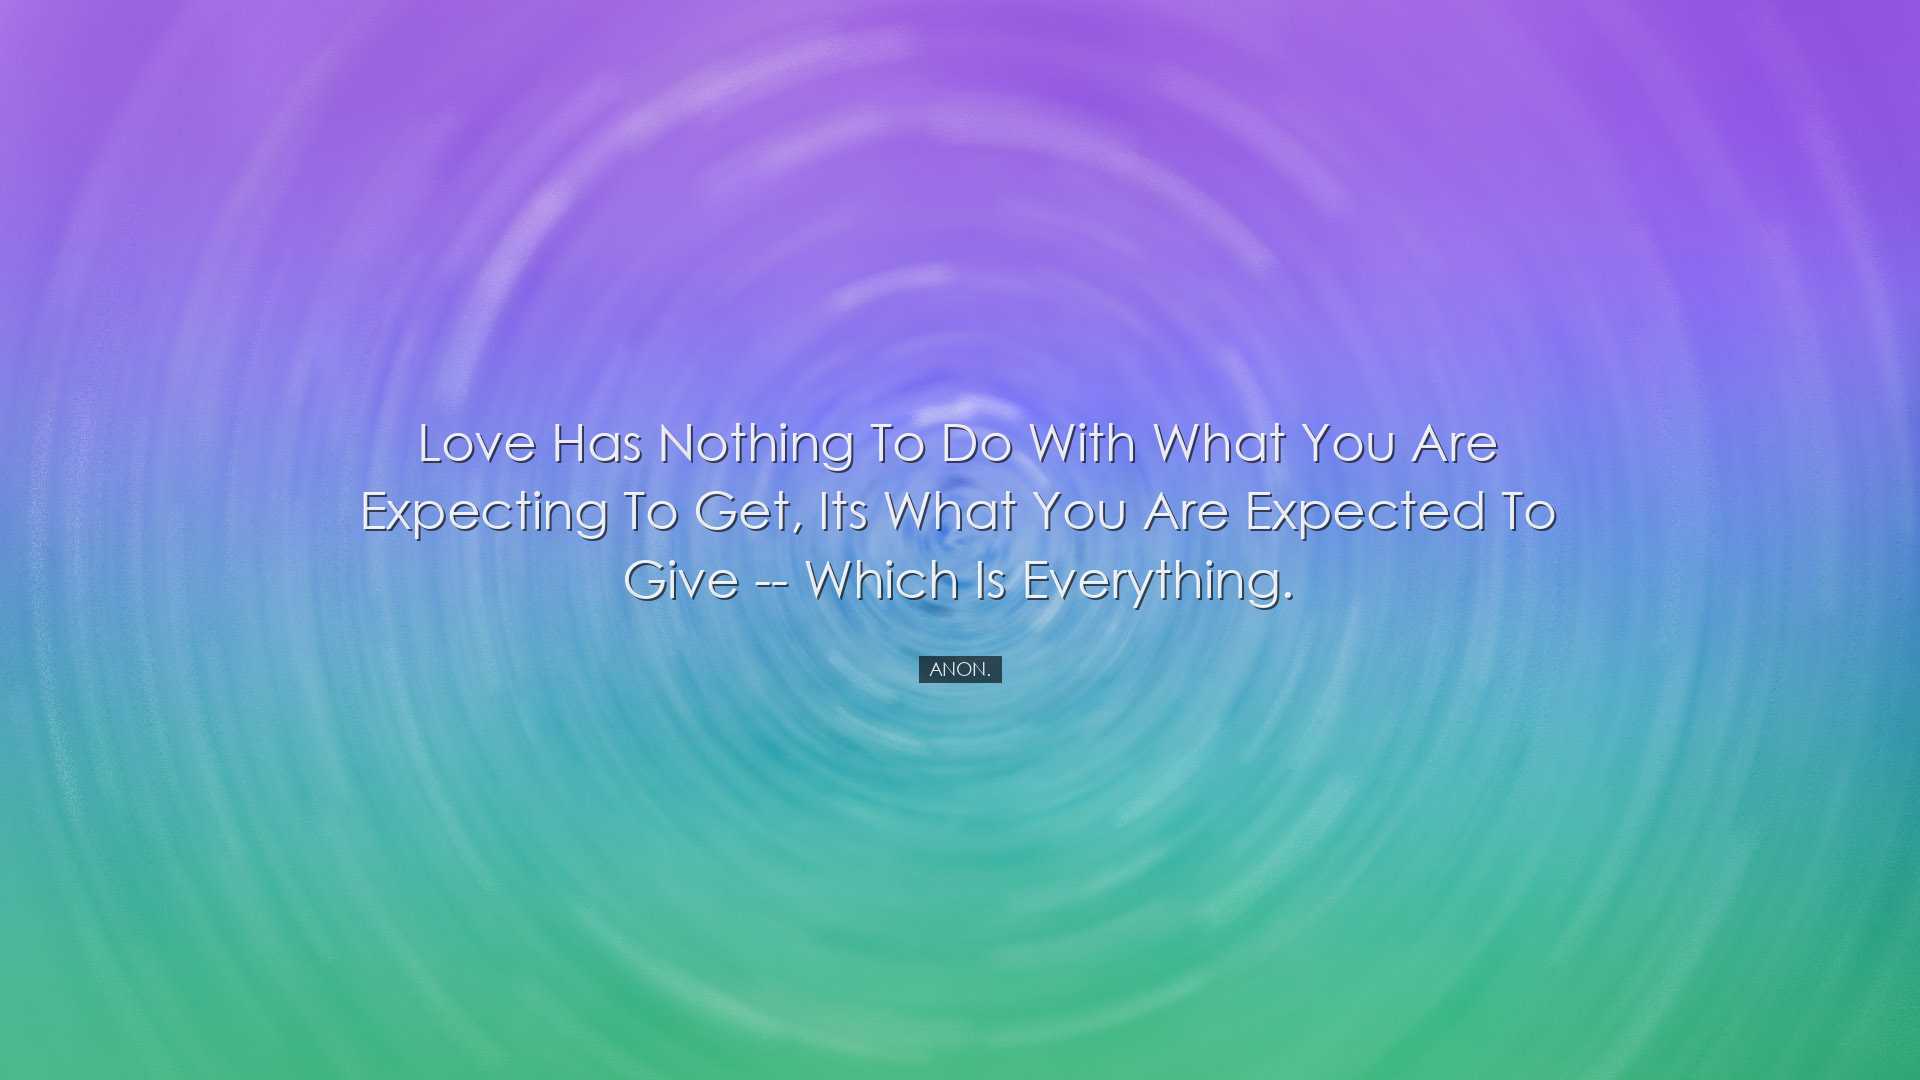 Love has nothing to do with what you are expecting to get, its wha